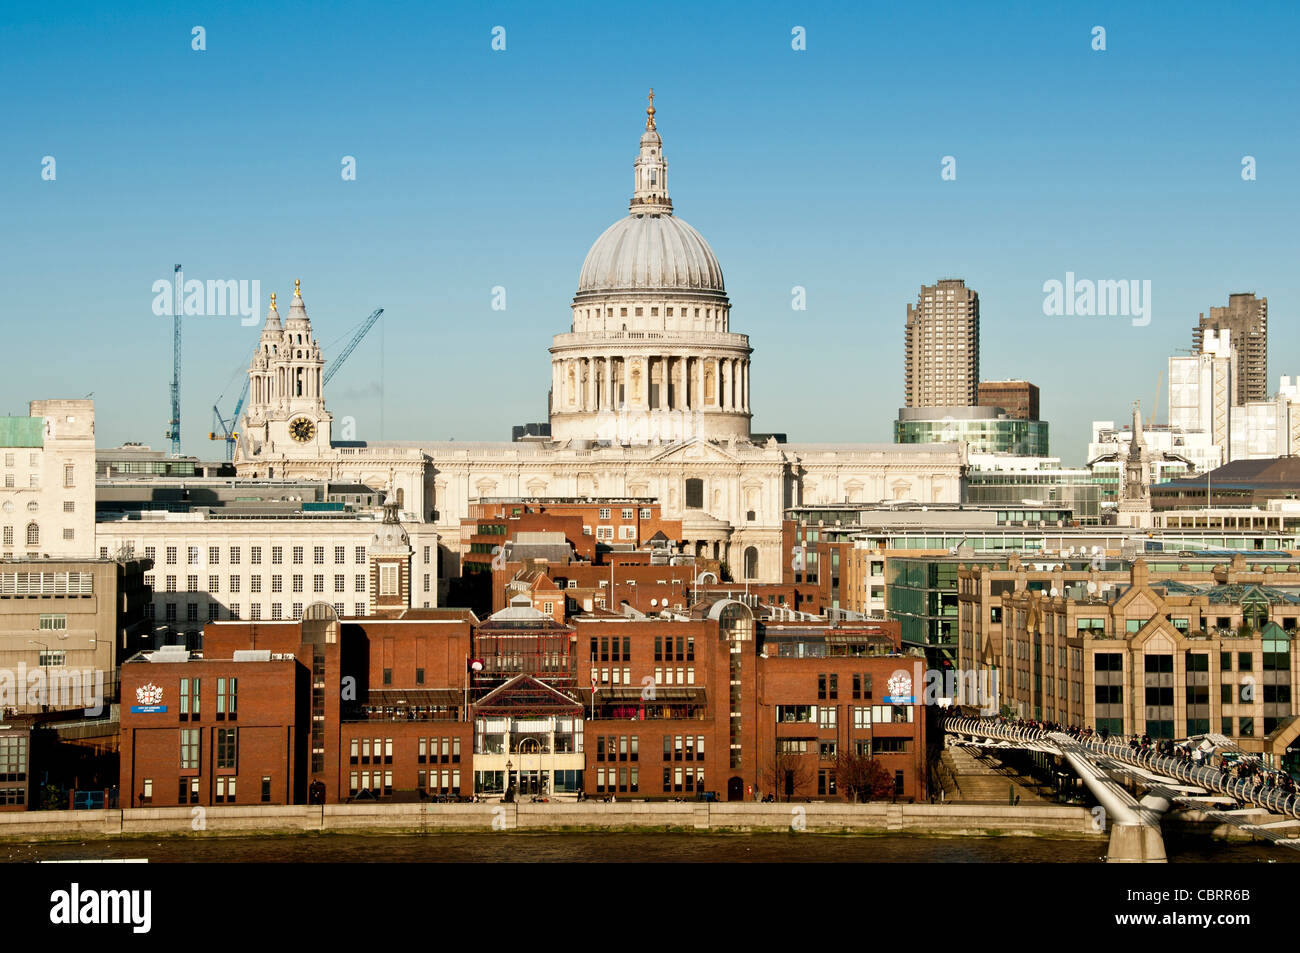 View from Tate Modern, London. Looking towards St Paul's Cathedral and City of London School on the North bank of the river Thames. London. Stock Photo